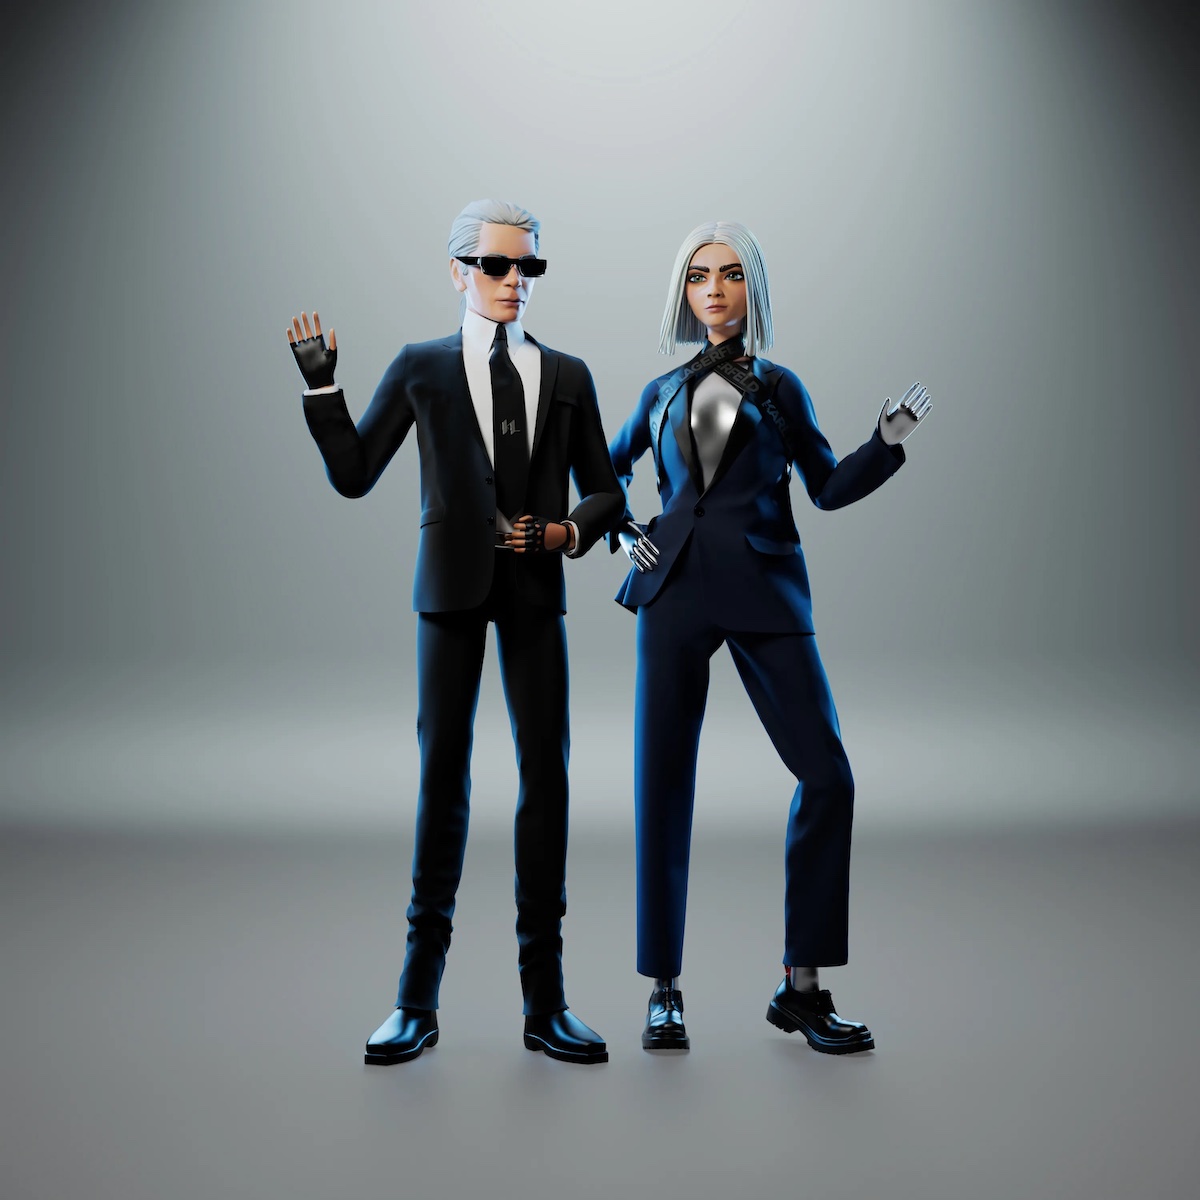 Karl Lagerfeld’s History with Cara Delevingne Continues with New Collaboration